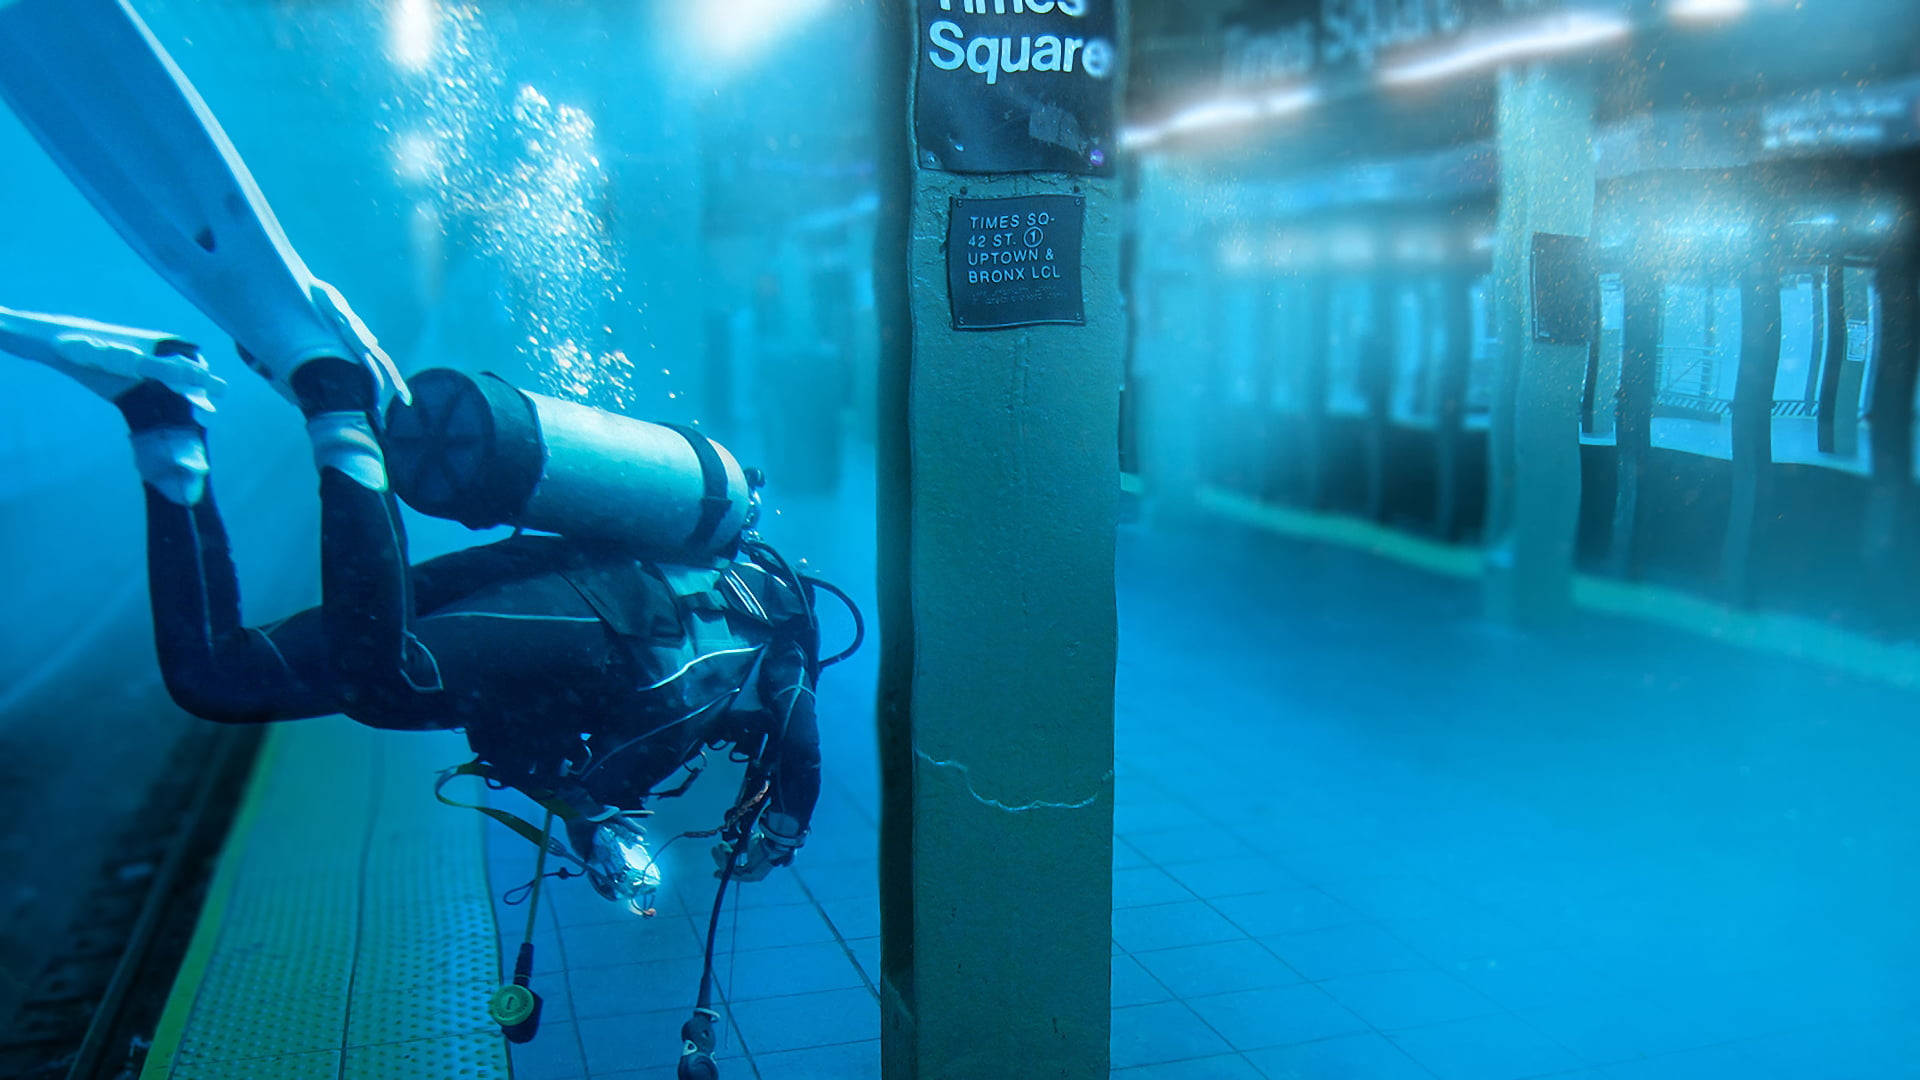 Scuba Diving In Flooded Subway Background